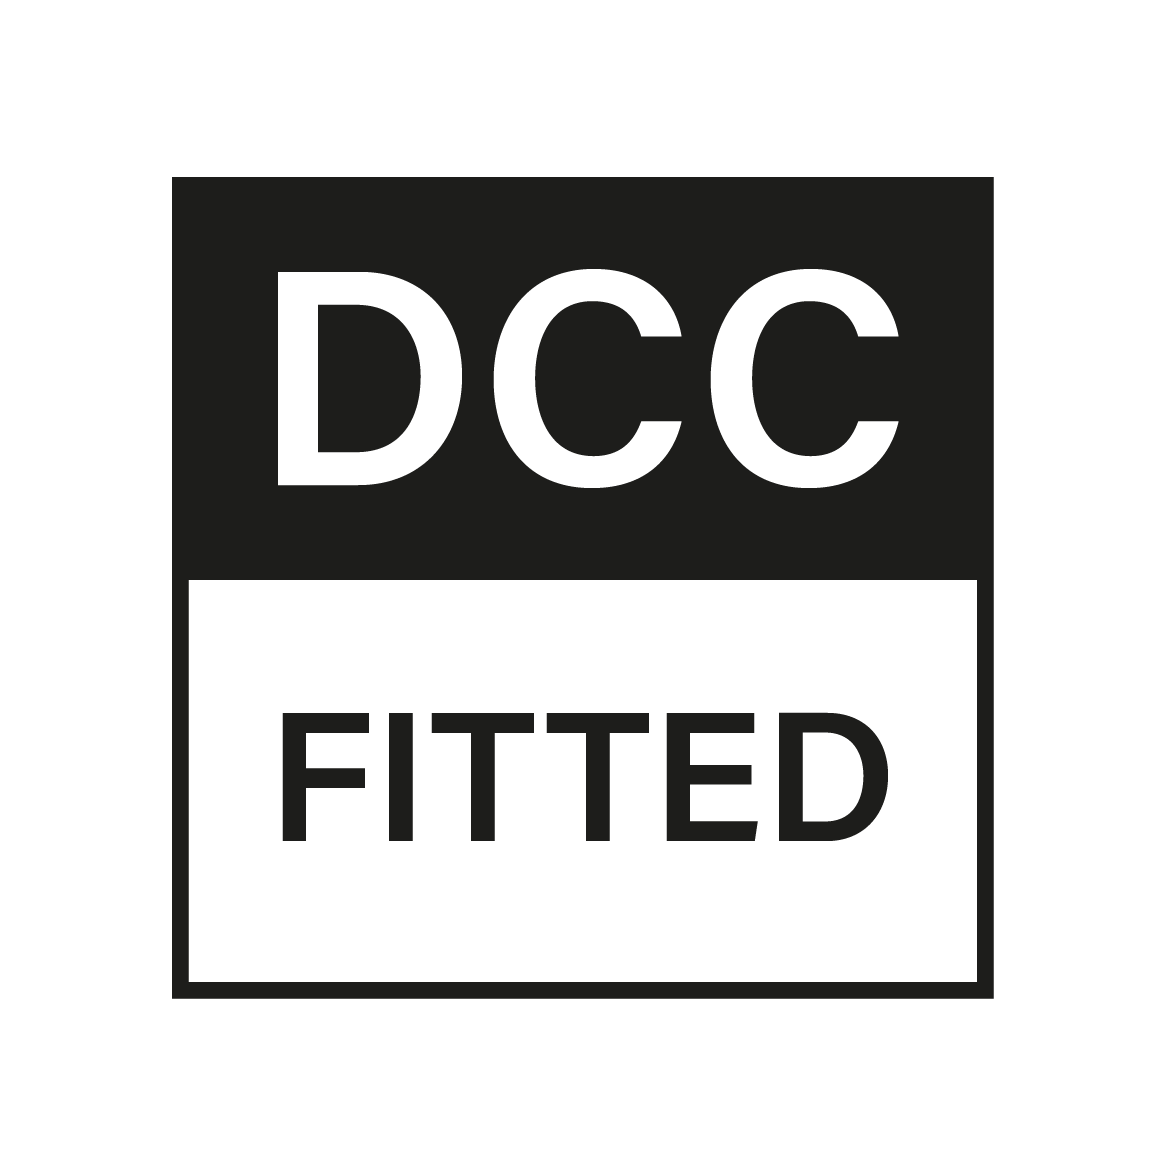 DCC Fitted